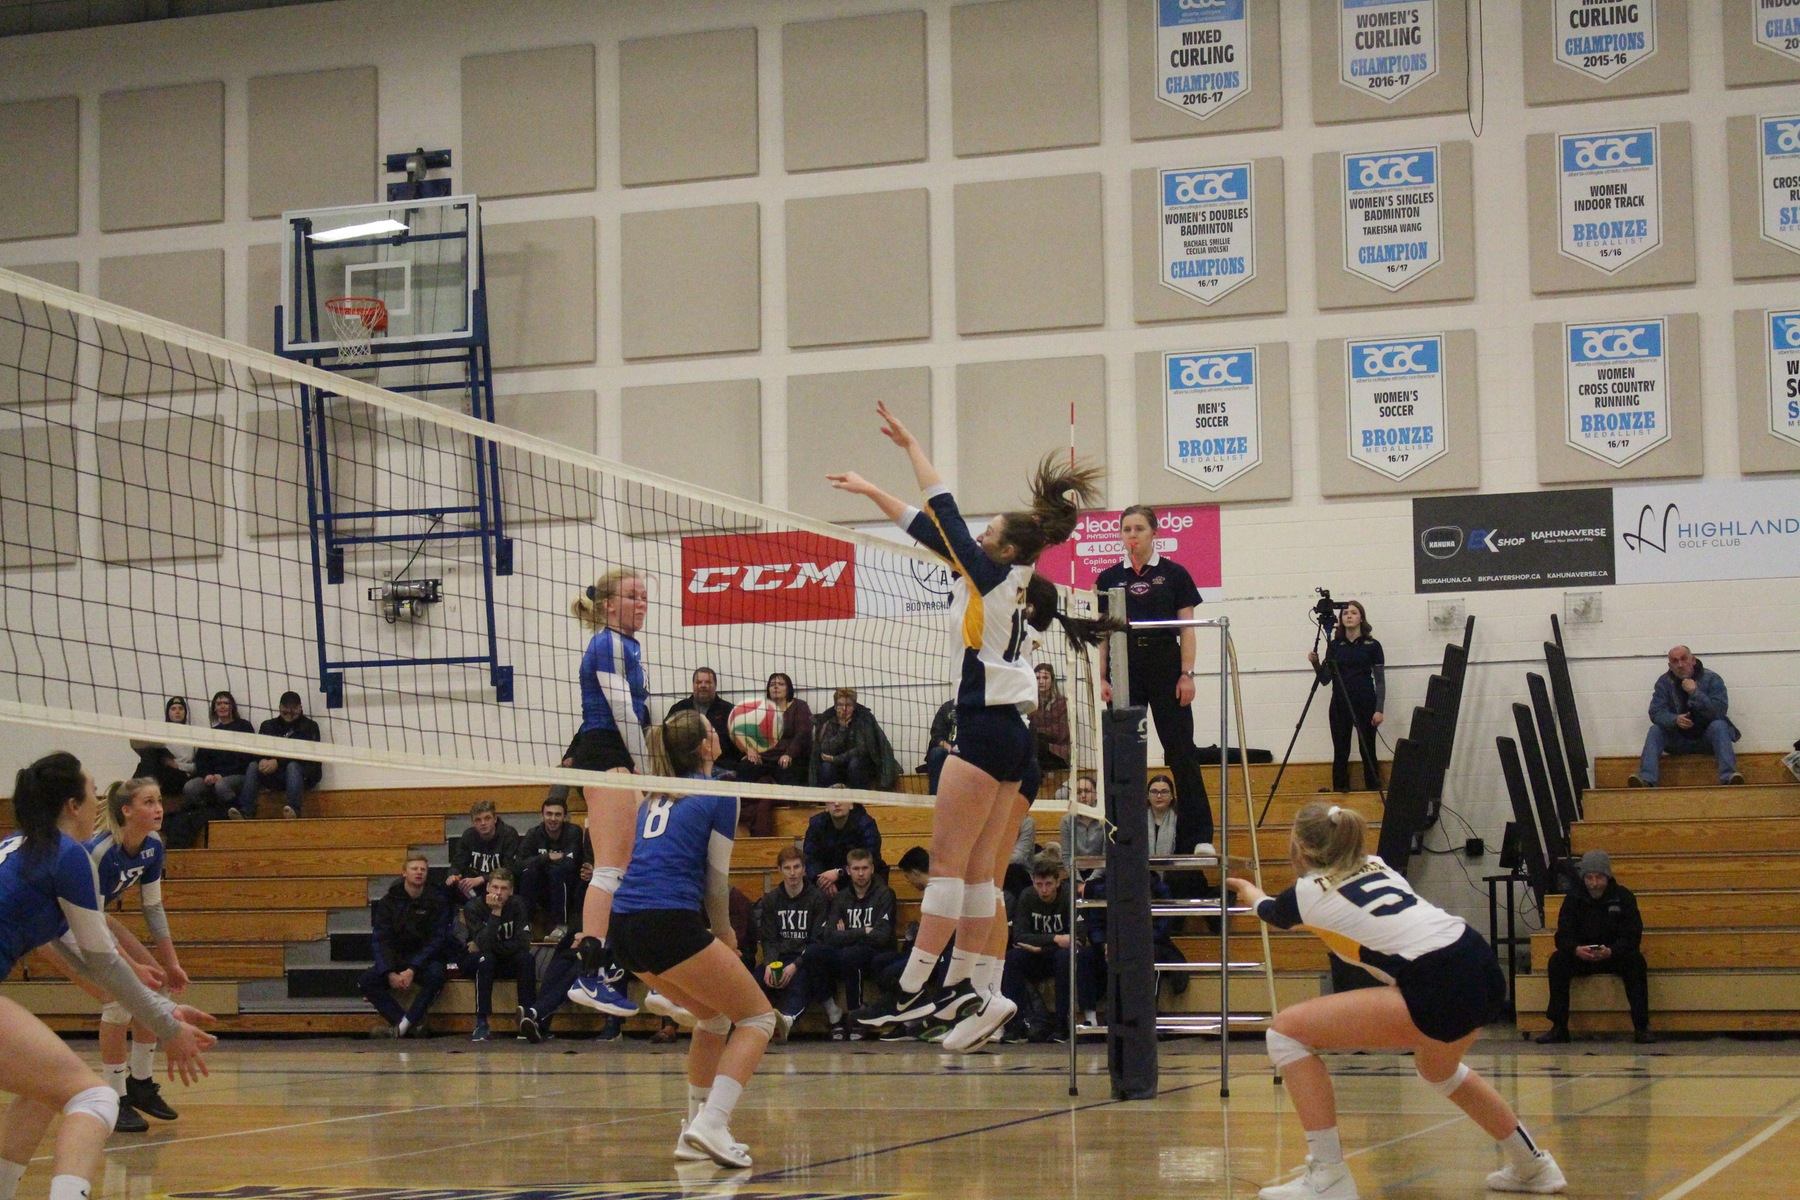 Thunder falls to Eagles in 3 sets